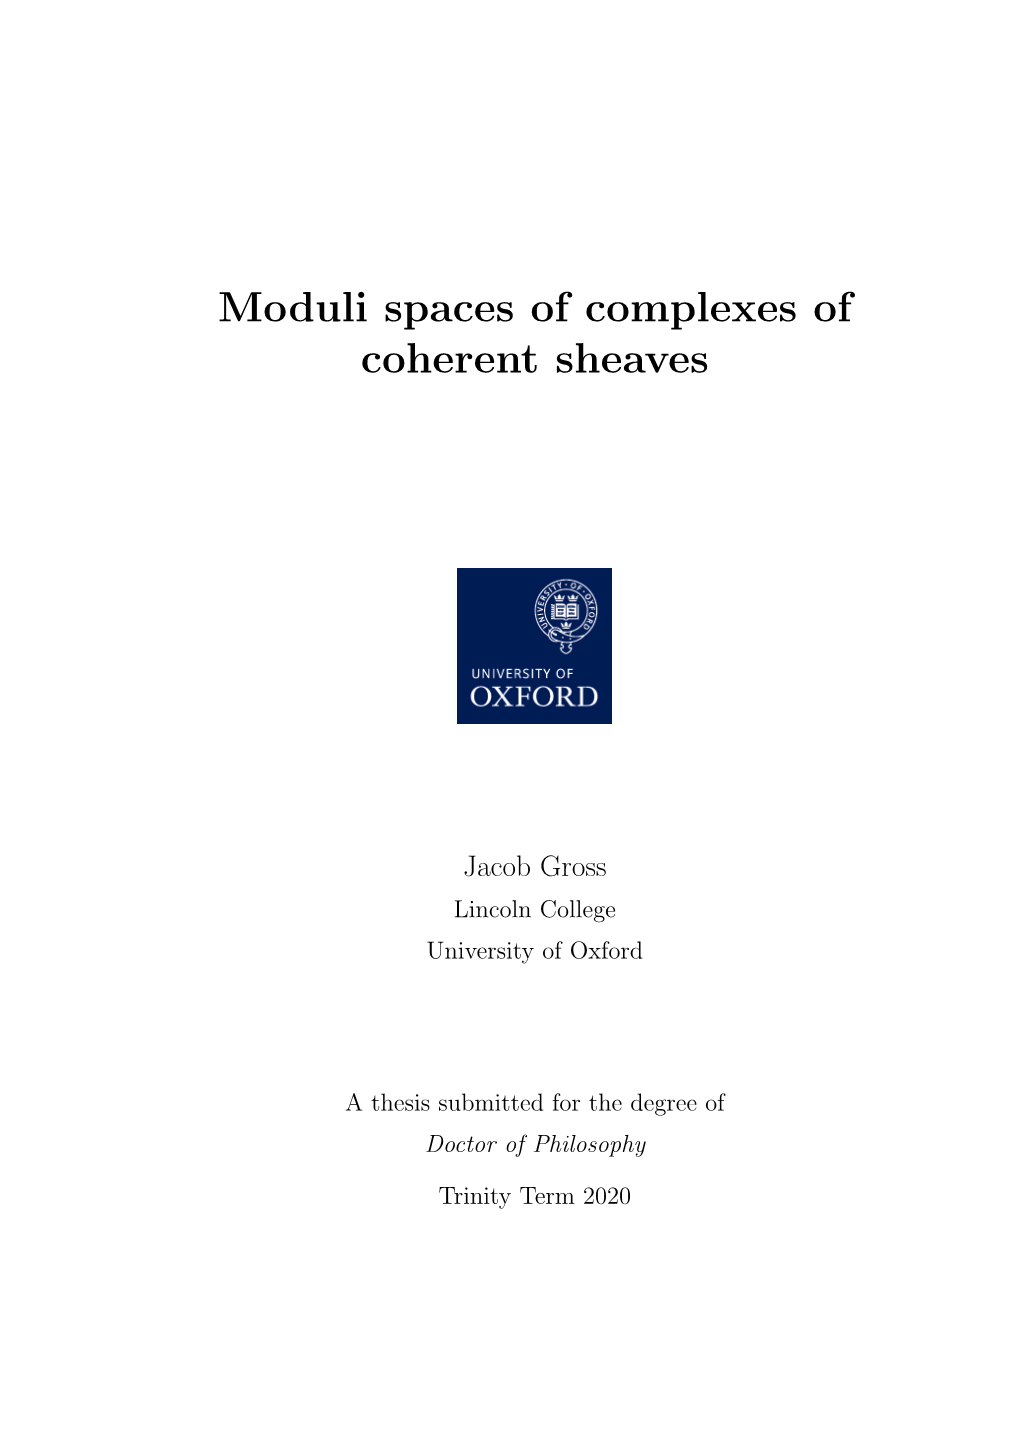 Moduli Spaces of Complexes of Coherent Sheaves